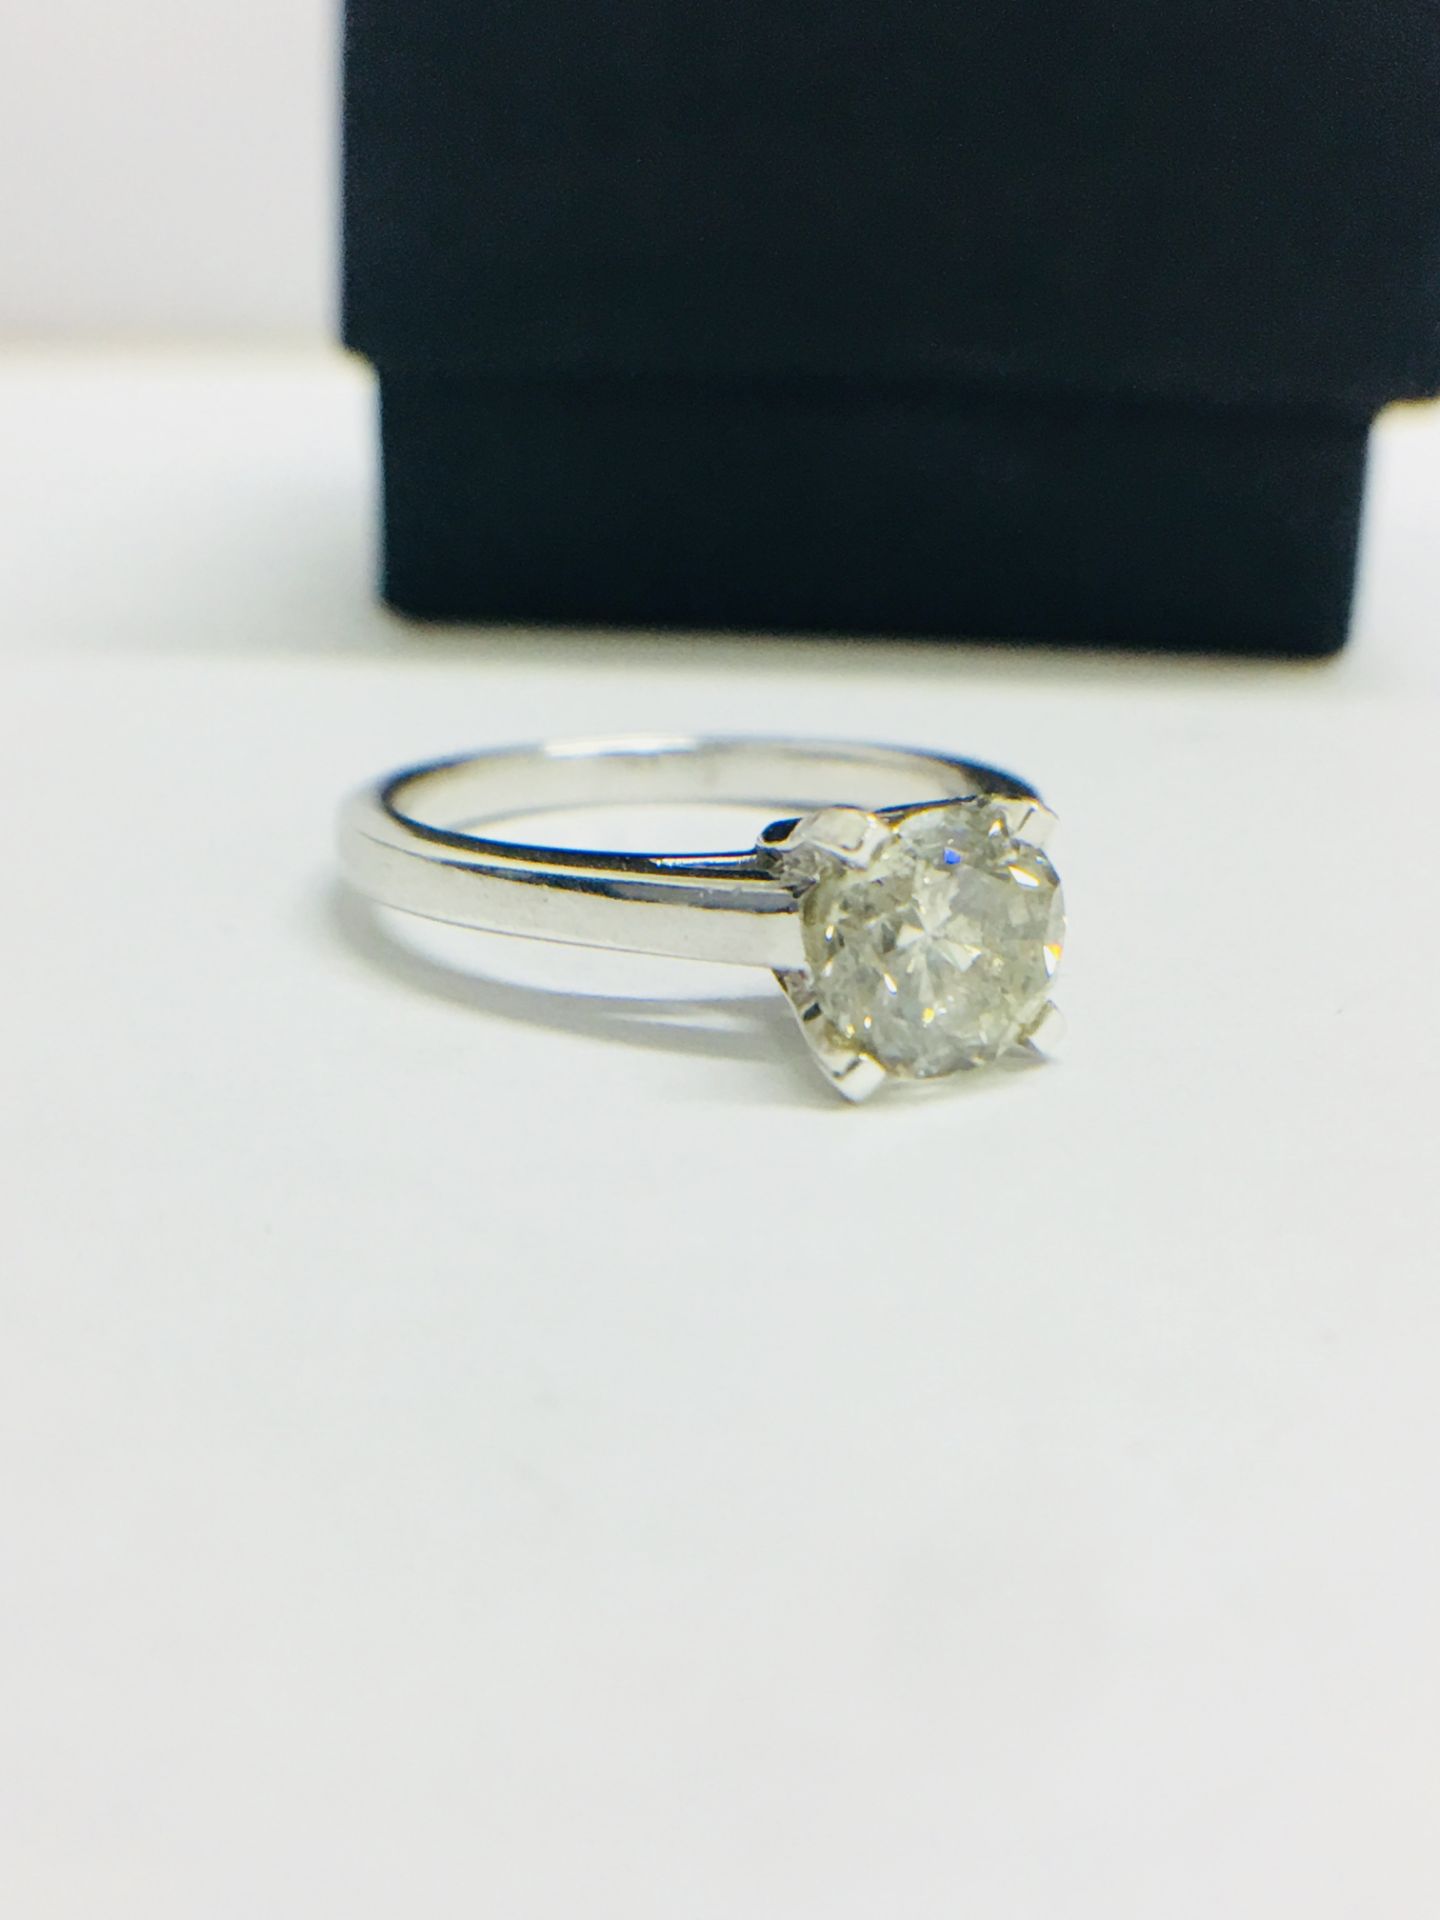 1.23Ct Diamond Solitaire Ring With A Brilliant Cut Diamond. - Image 8 of 8